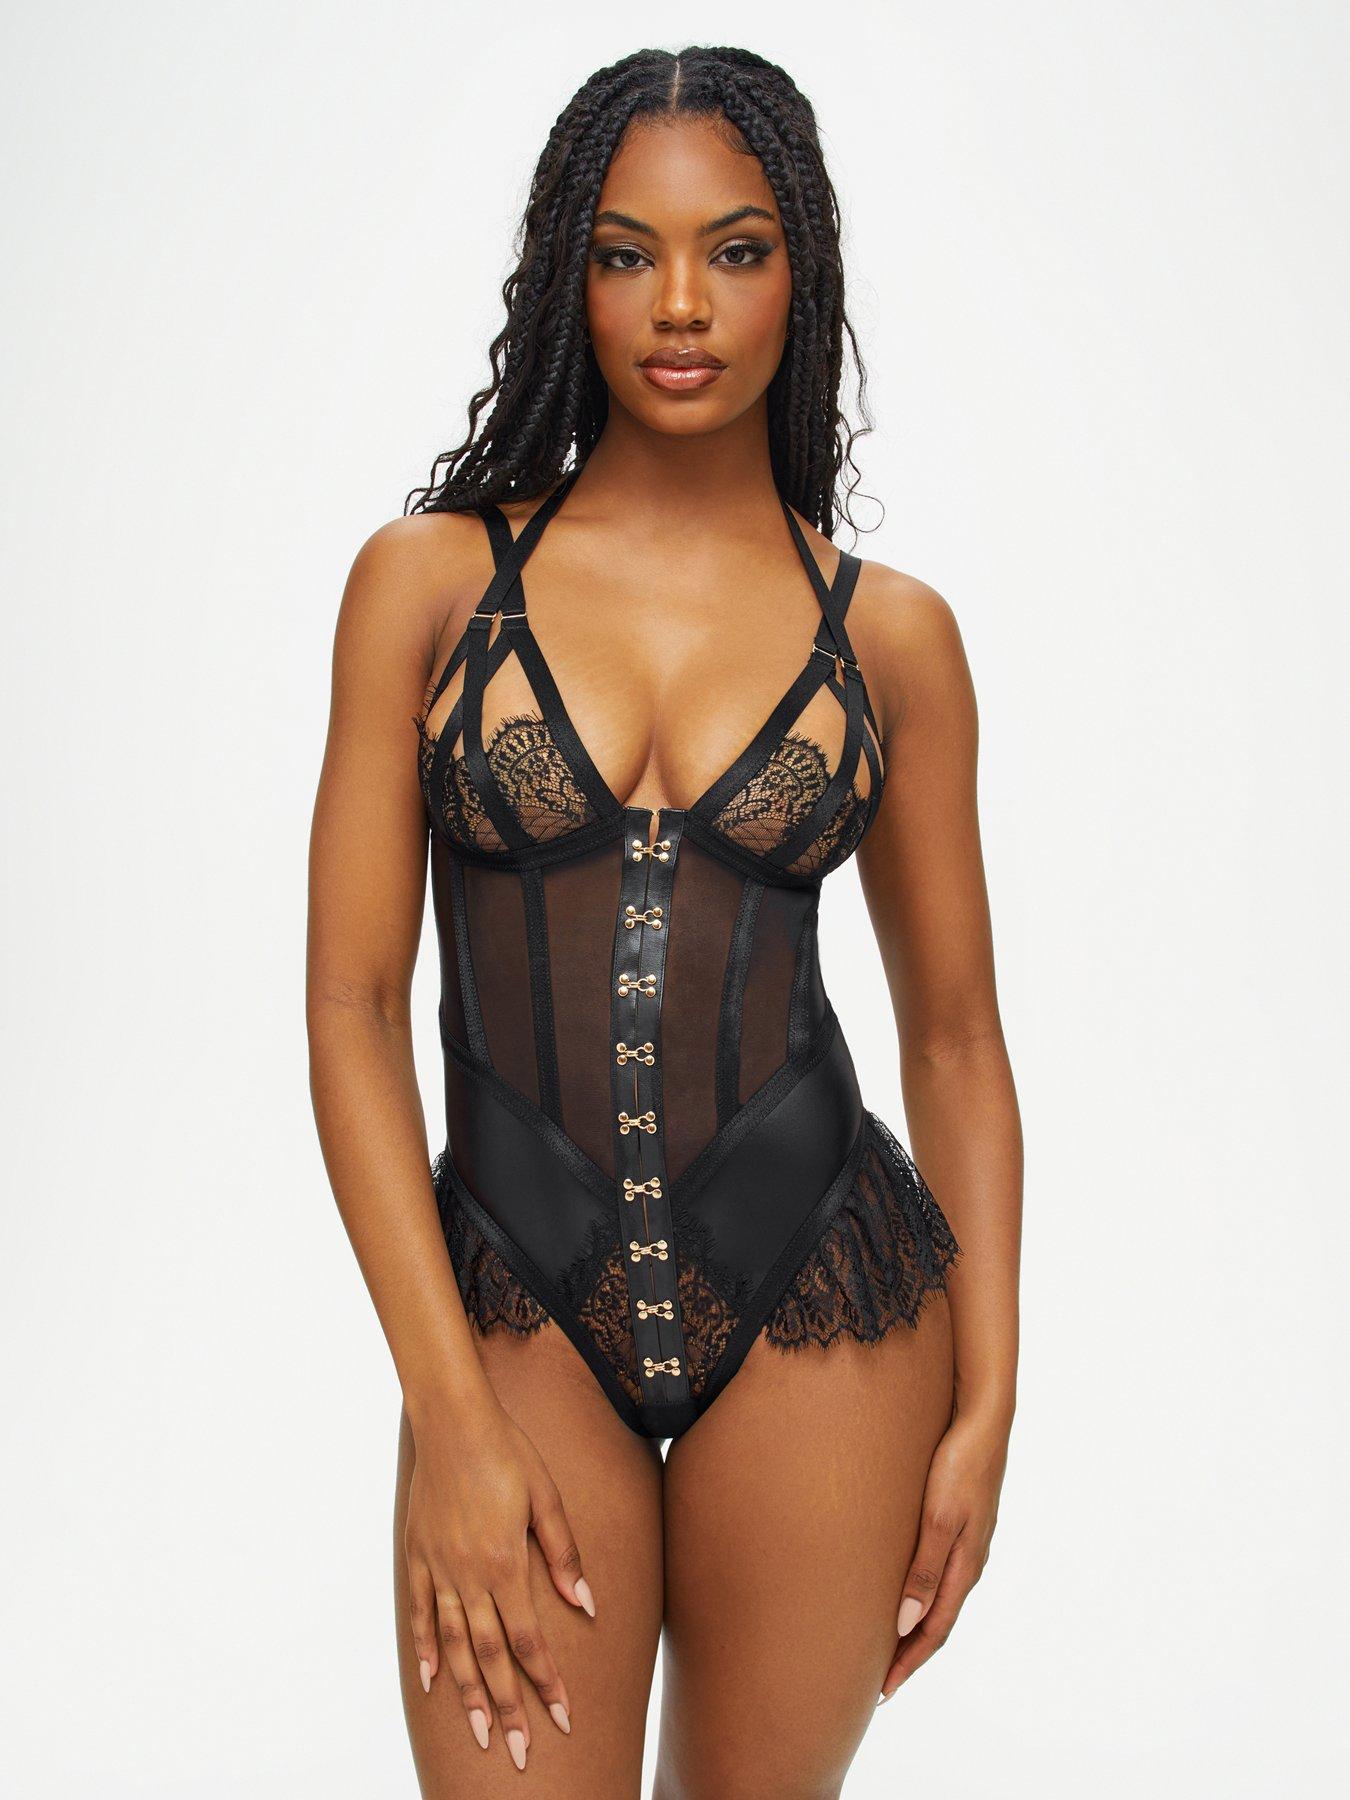 Belle Teddy, super flirty in Lace & Mesh tie-up teddy. Deep V front, &  sheer back, Plus size